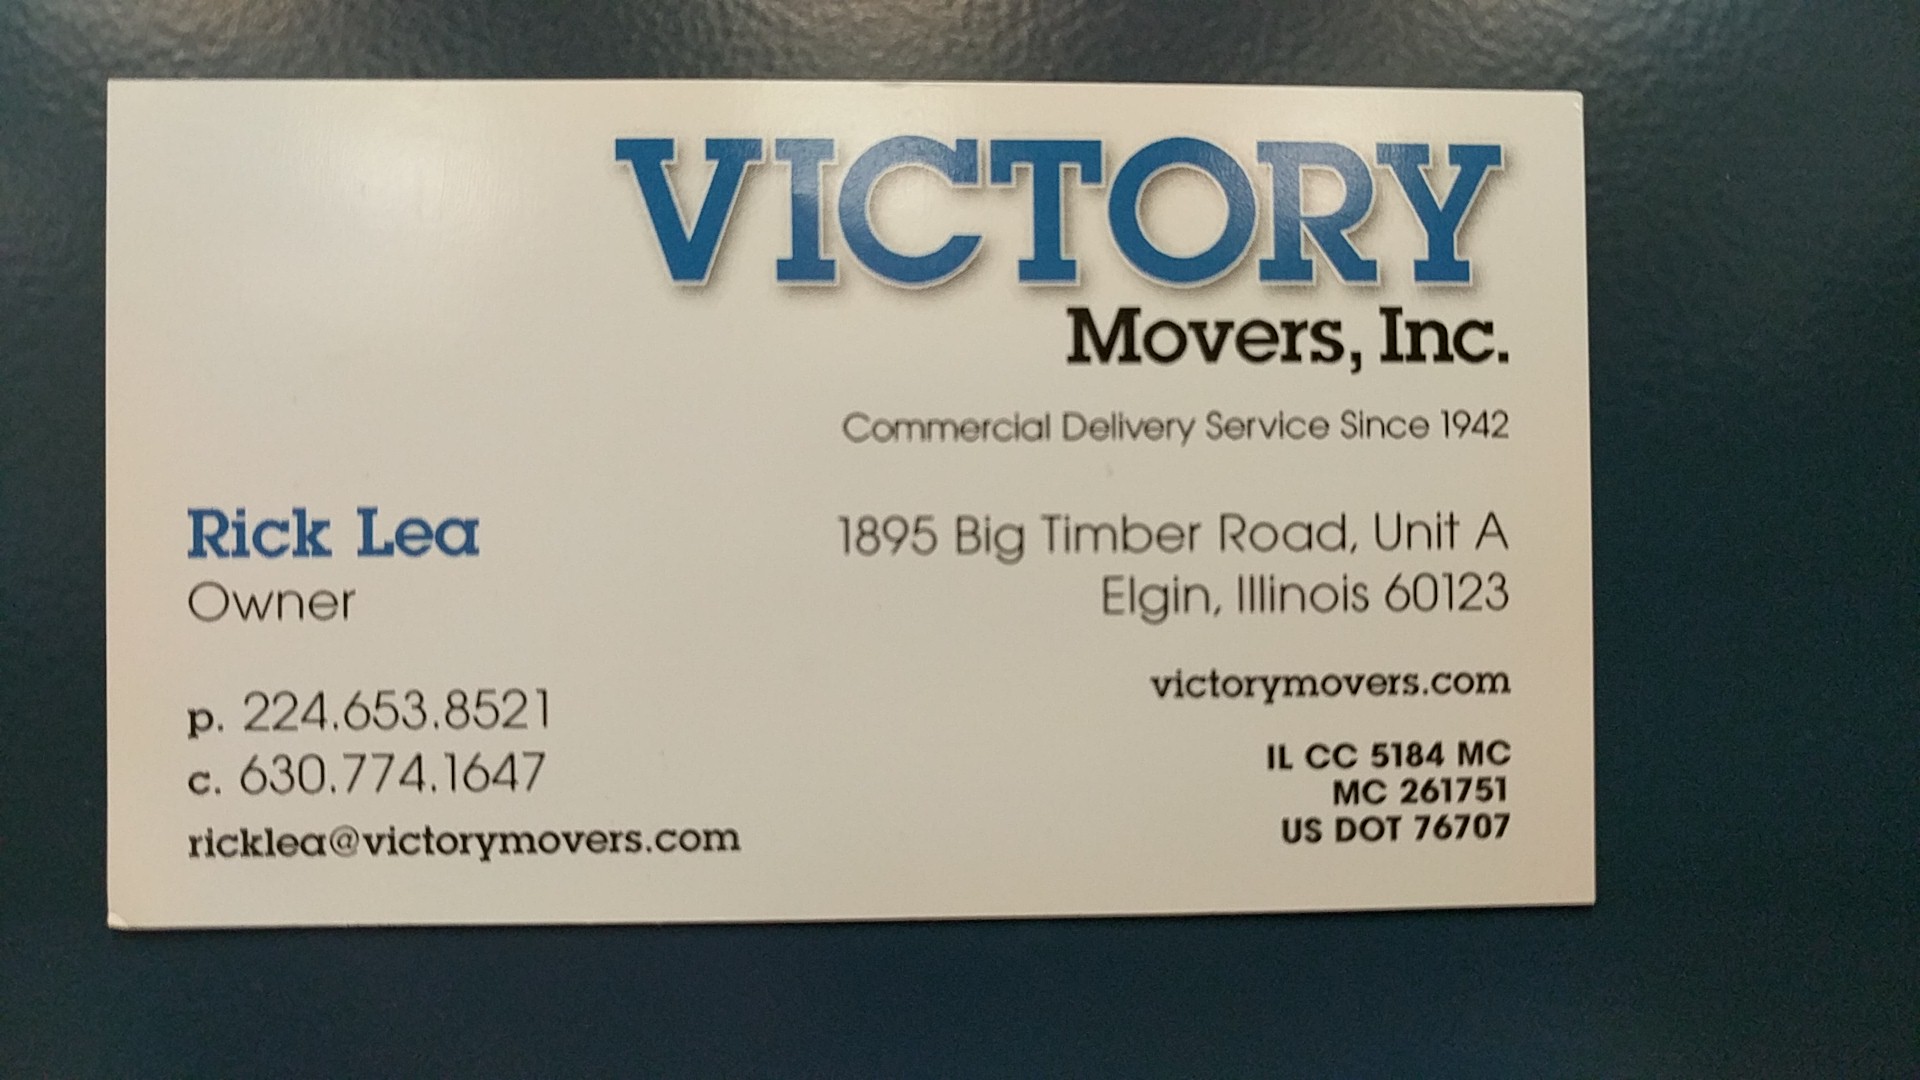 Victory Movers, Inc.